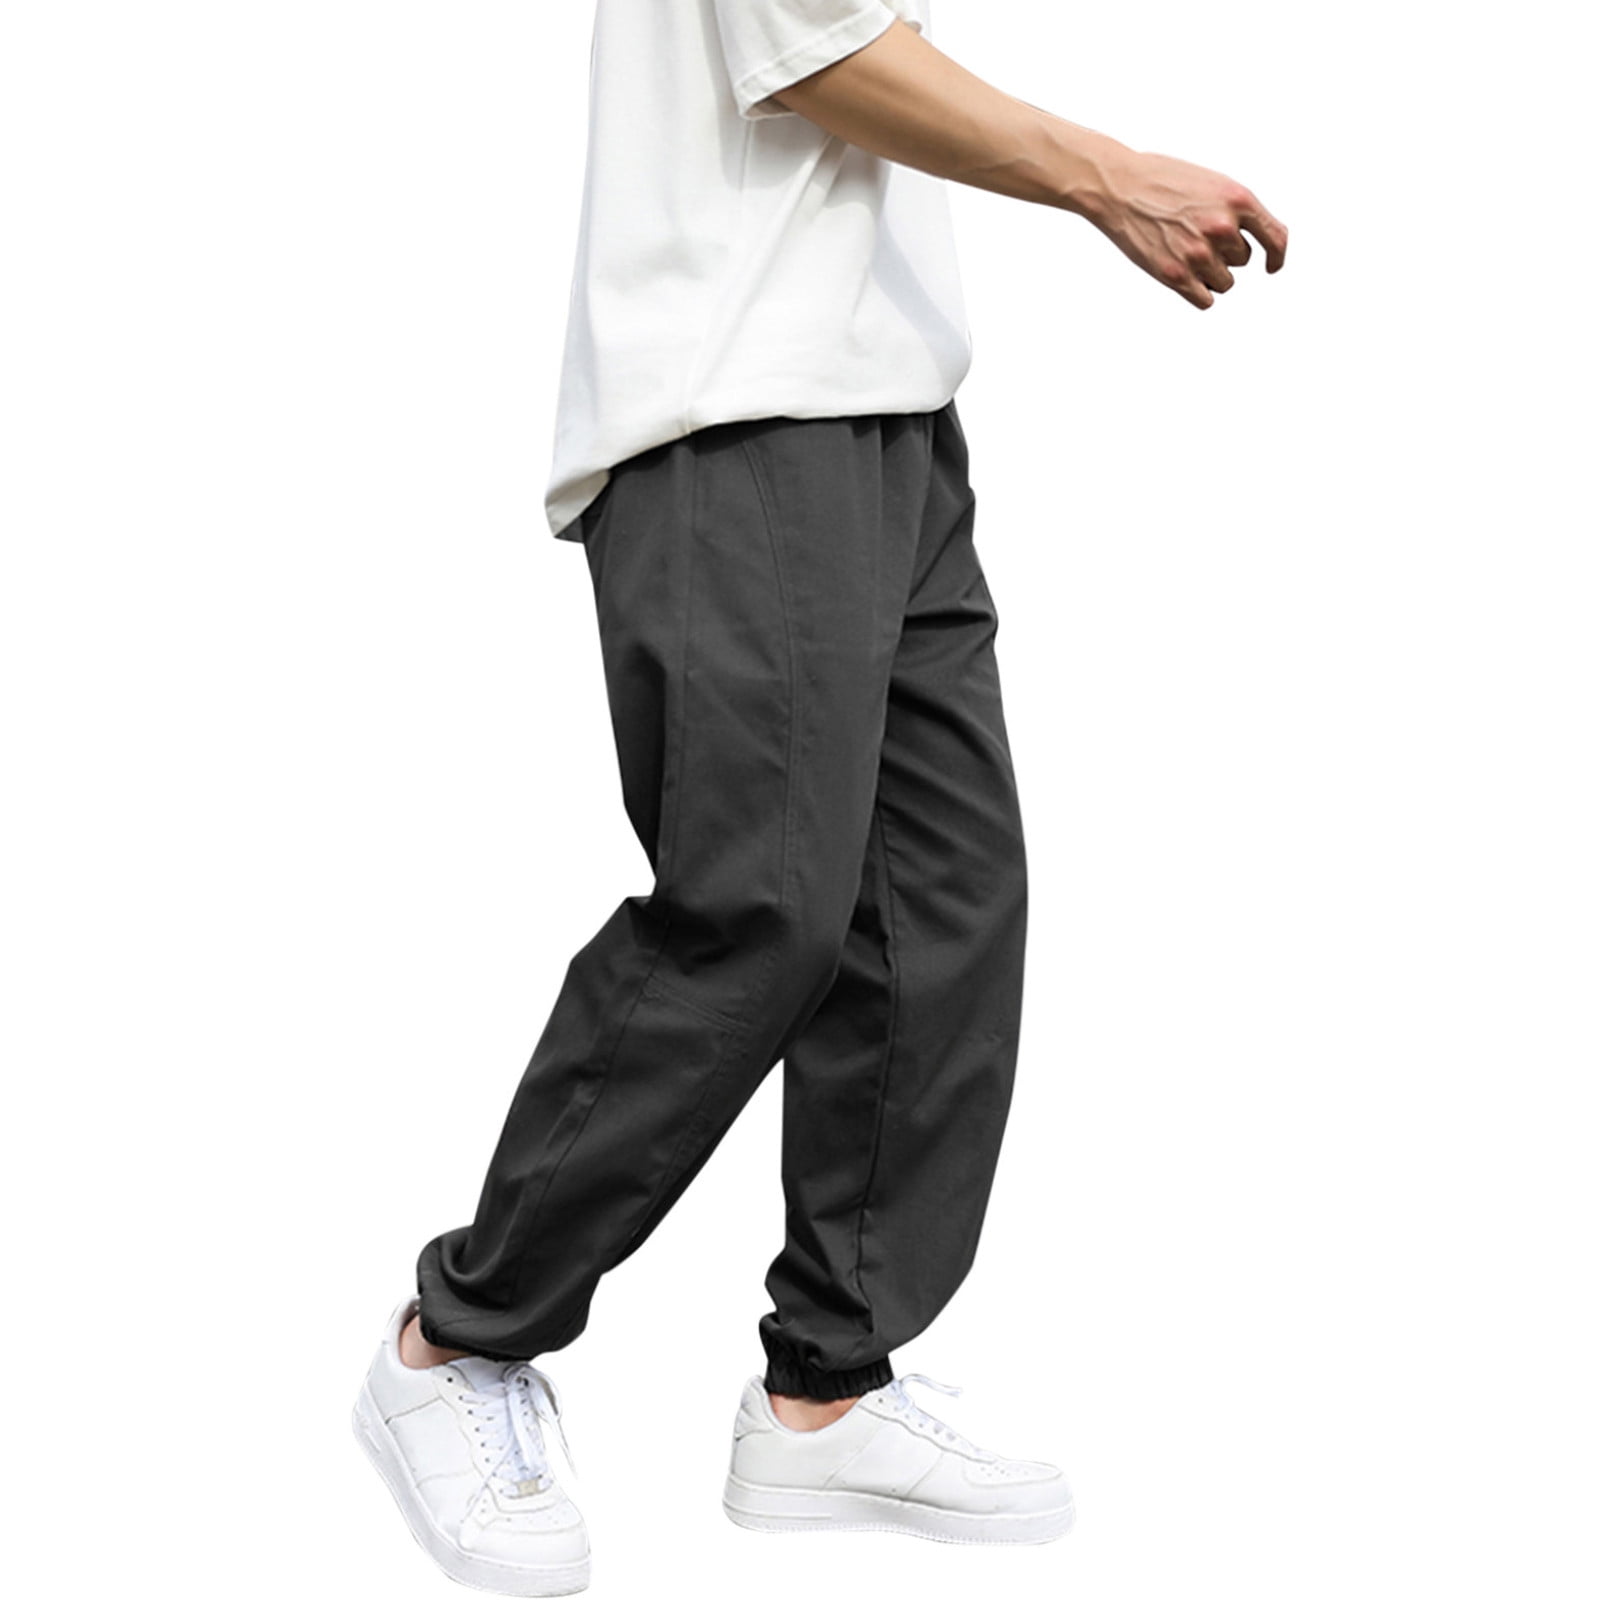 Relaxed Fit Cargo trousers - Black - Men | H&M IN